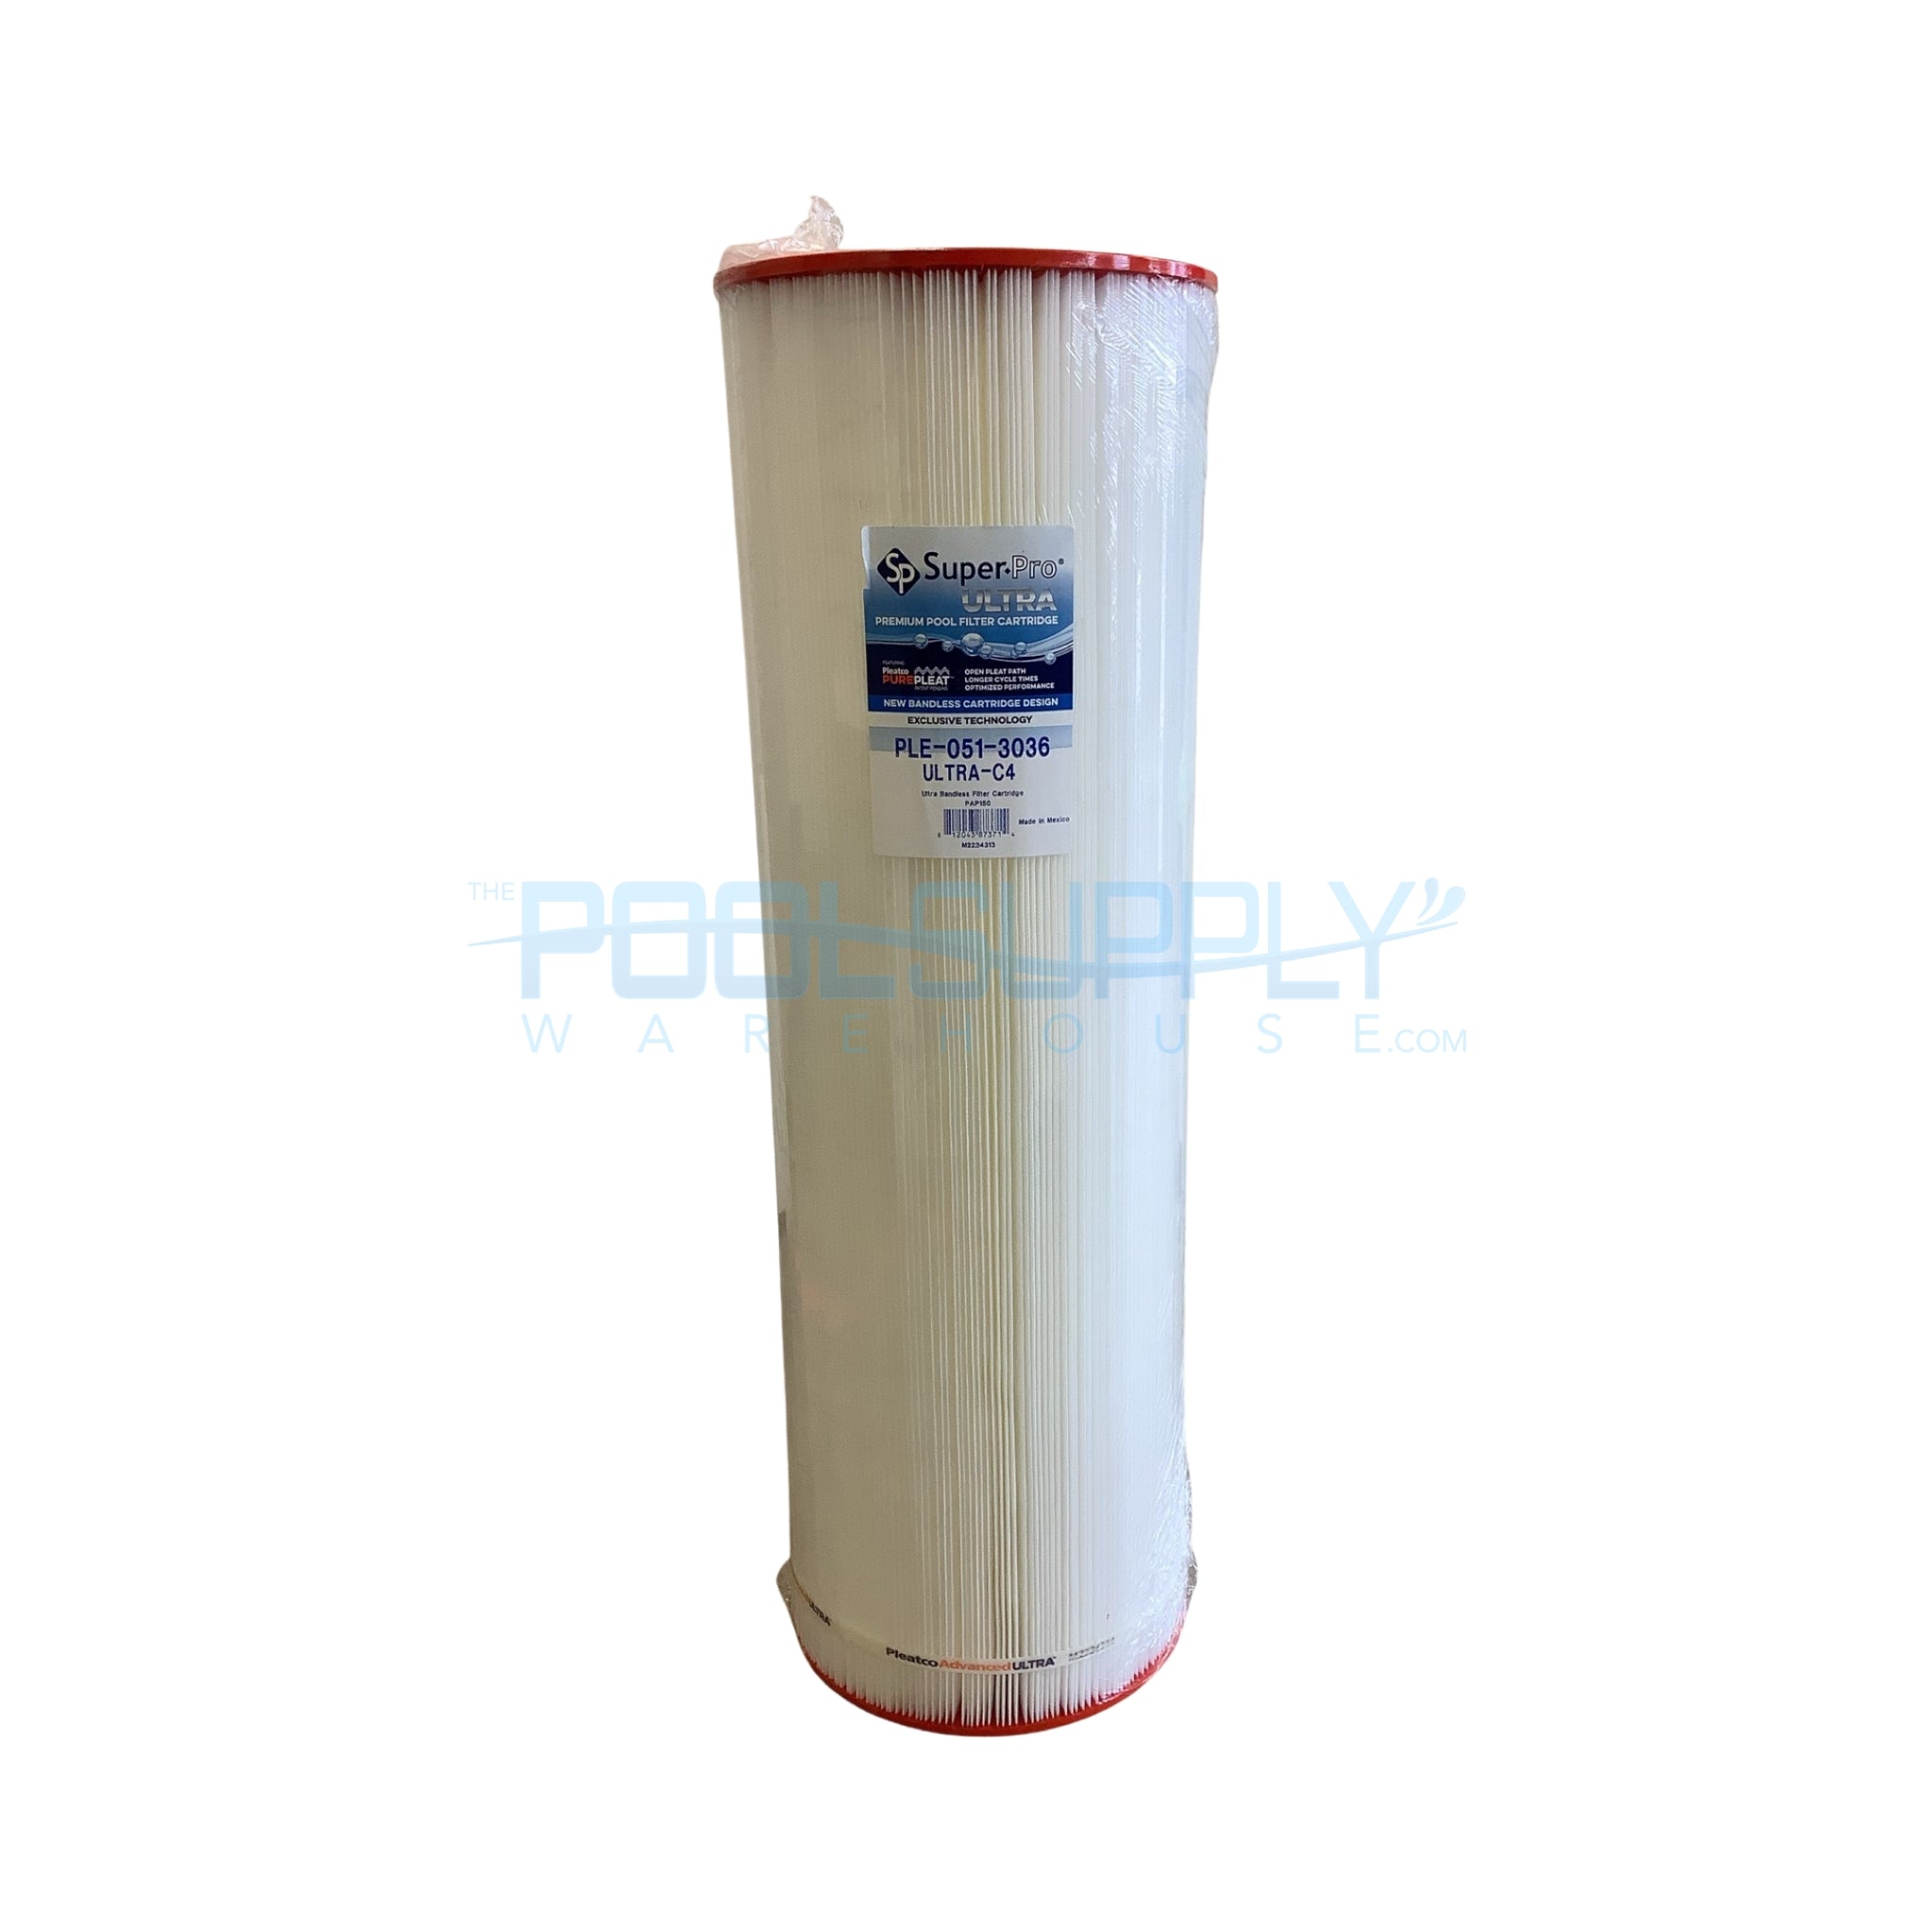 Super-Pro 150 Sq Ft Replacement Filter Cartridge - ULTRA-C4 - The Pool Supply Warehouse